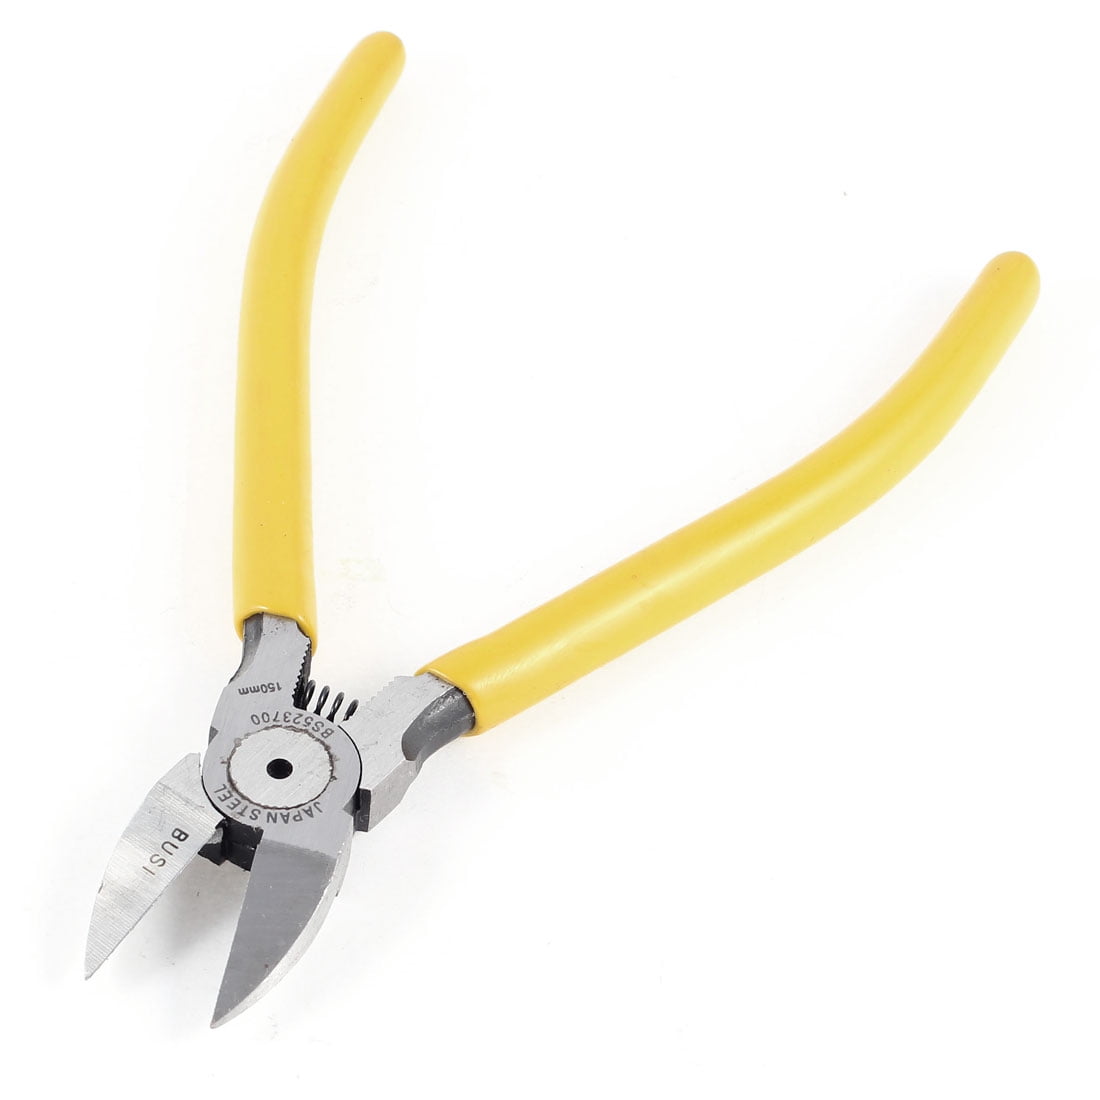 Aluminum Copper Ratchet Cable Cutters,Wire Cutters for Cutting